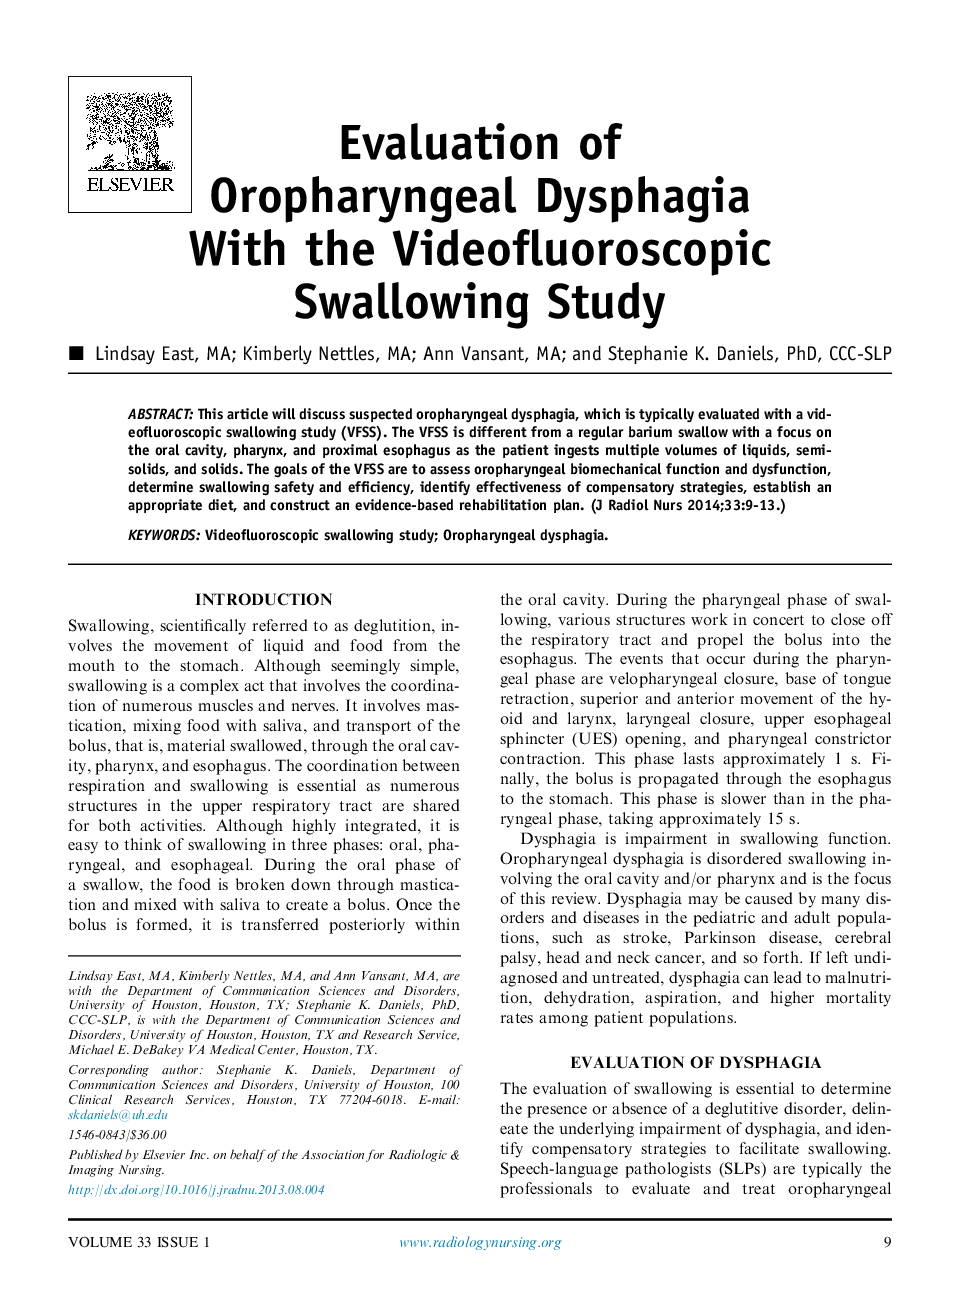 Evaluation of Oropharyngeal Dysphagia With the Videofluoroscopic Swallowing Study